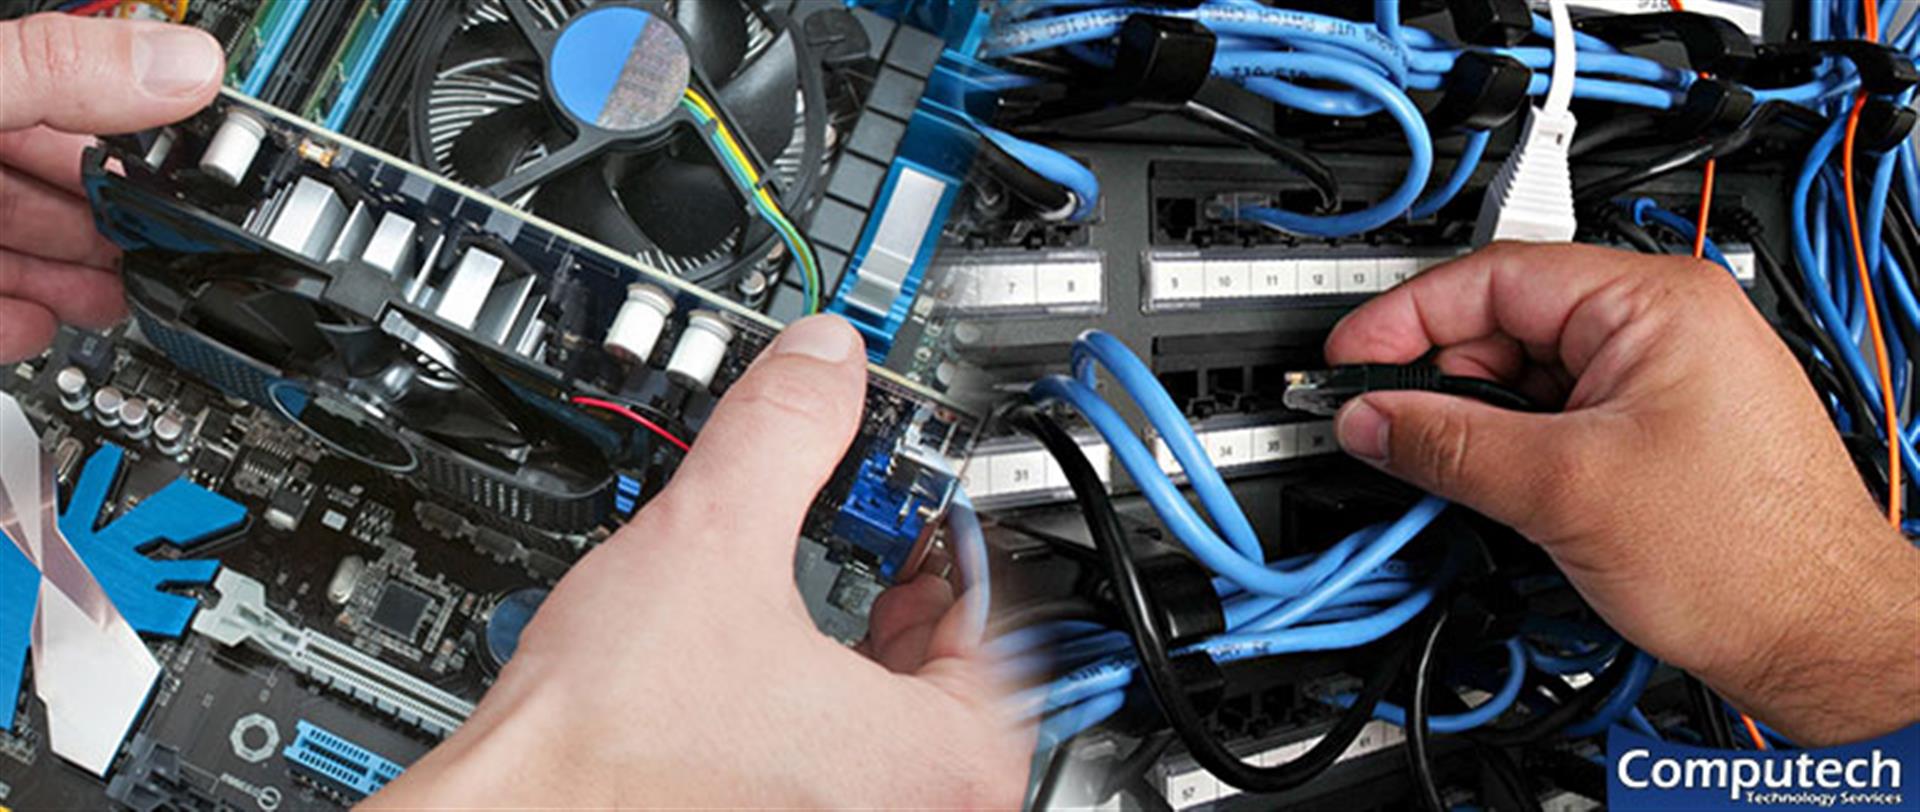 Rockmart Georgia Onsite Computer PC & Printer Repair, Networking, Voice & Data Cabling Services